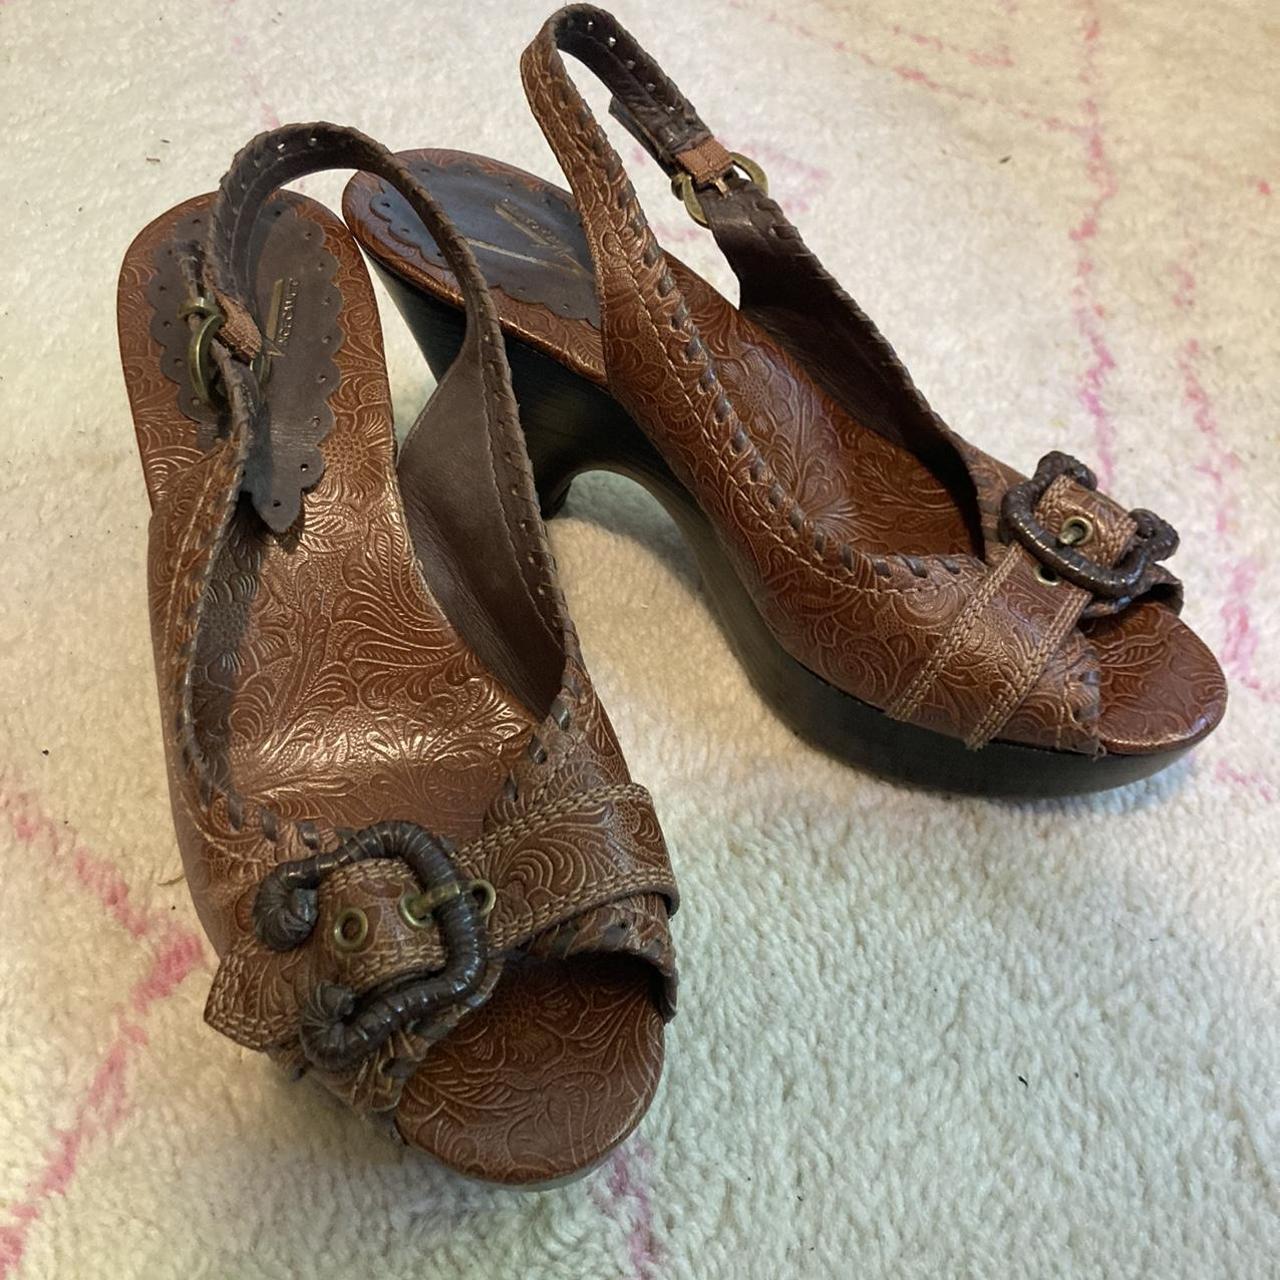 Vince Camuto Women's Brown and Tan Footwear